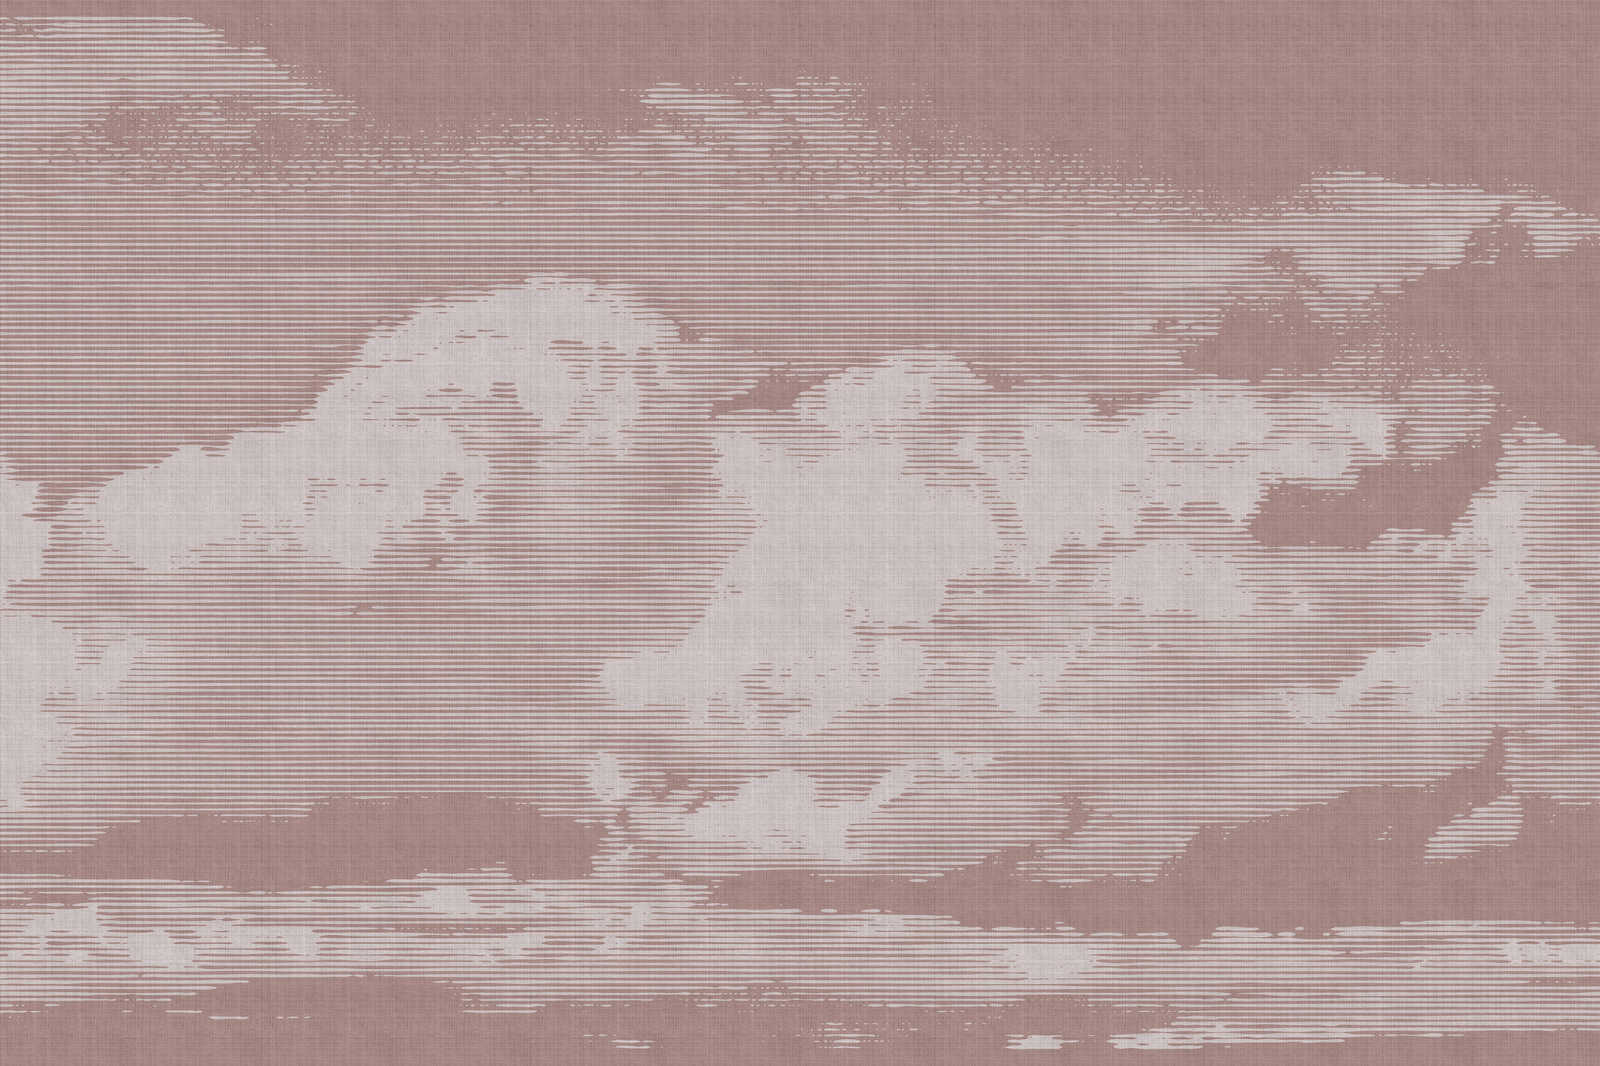             Clouds 3 - Heavenly canvas picture with cloud motif - Nature linen look - 1.20 m x 0.80 m
        